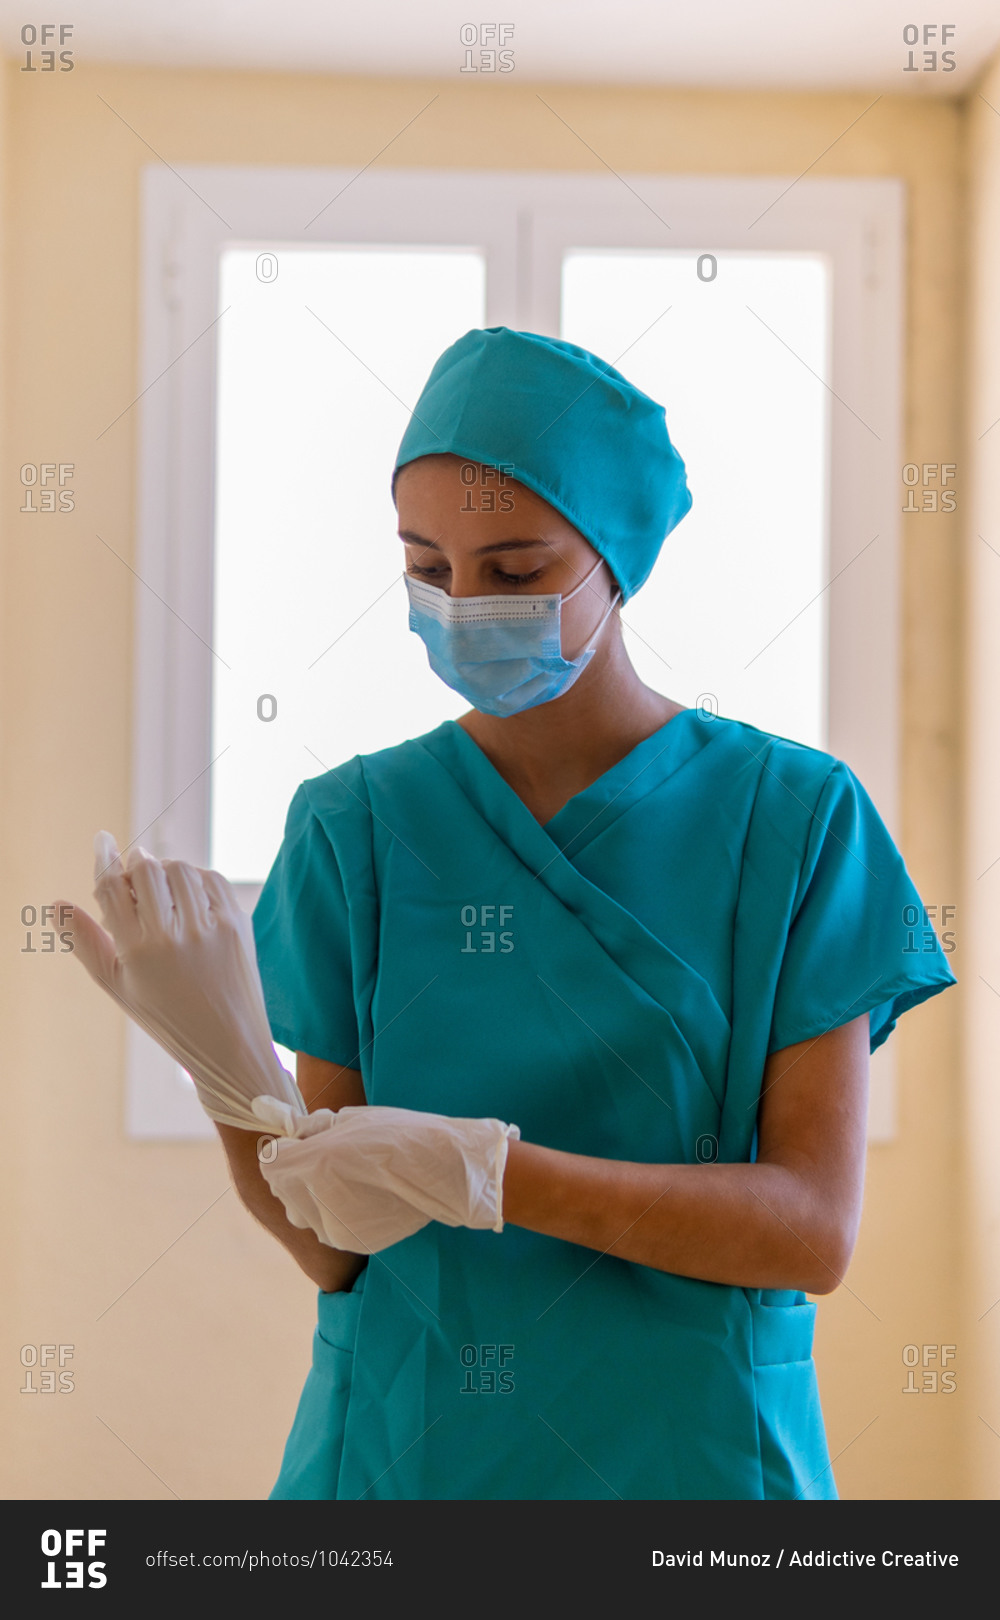 Young nurse in blue scrubs and medical mask putting on sterile latex gloves while preparing for work in clinic during coronavirus pandemic